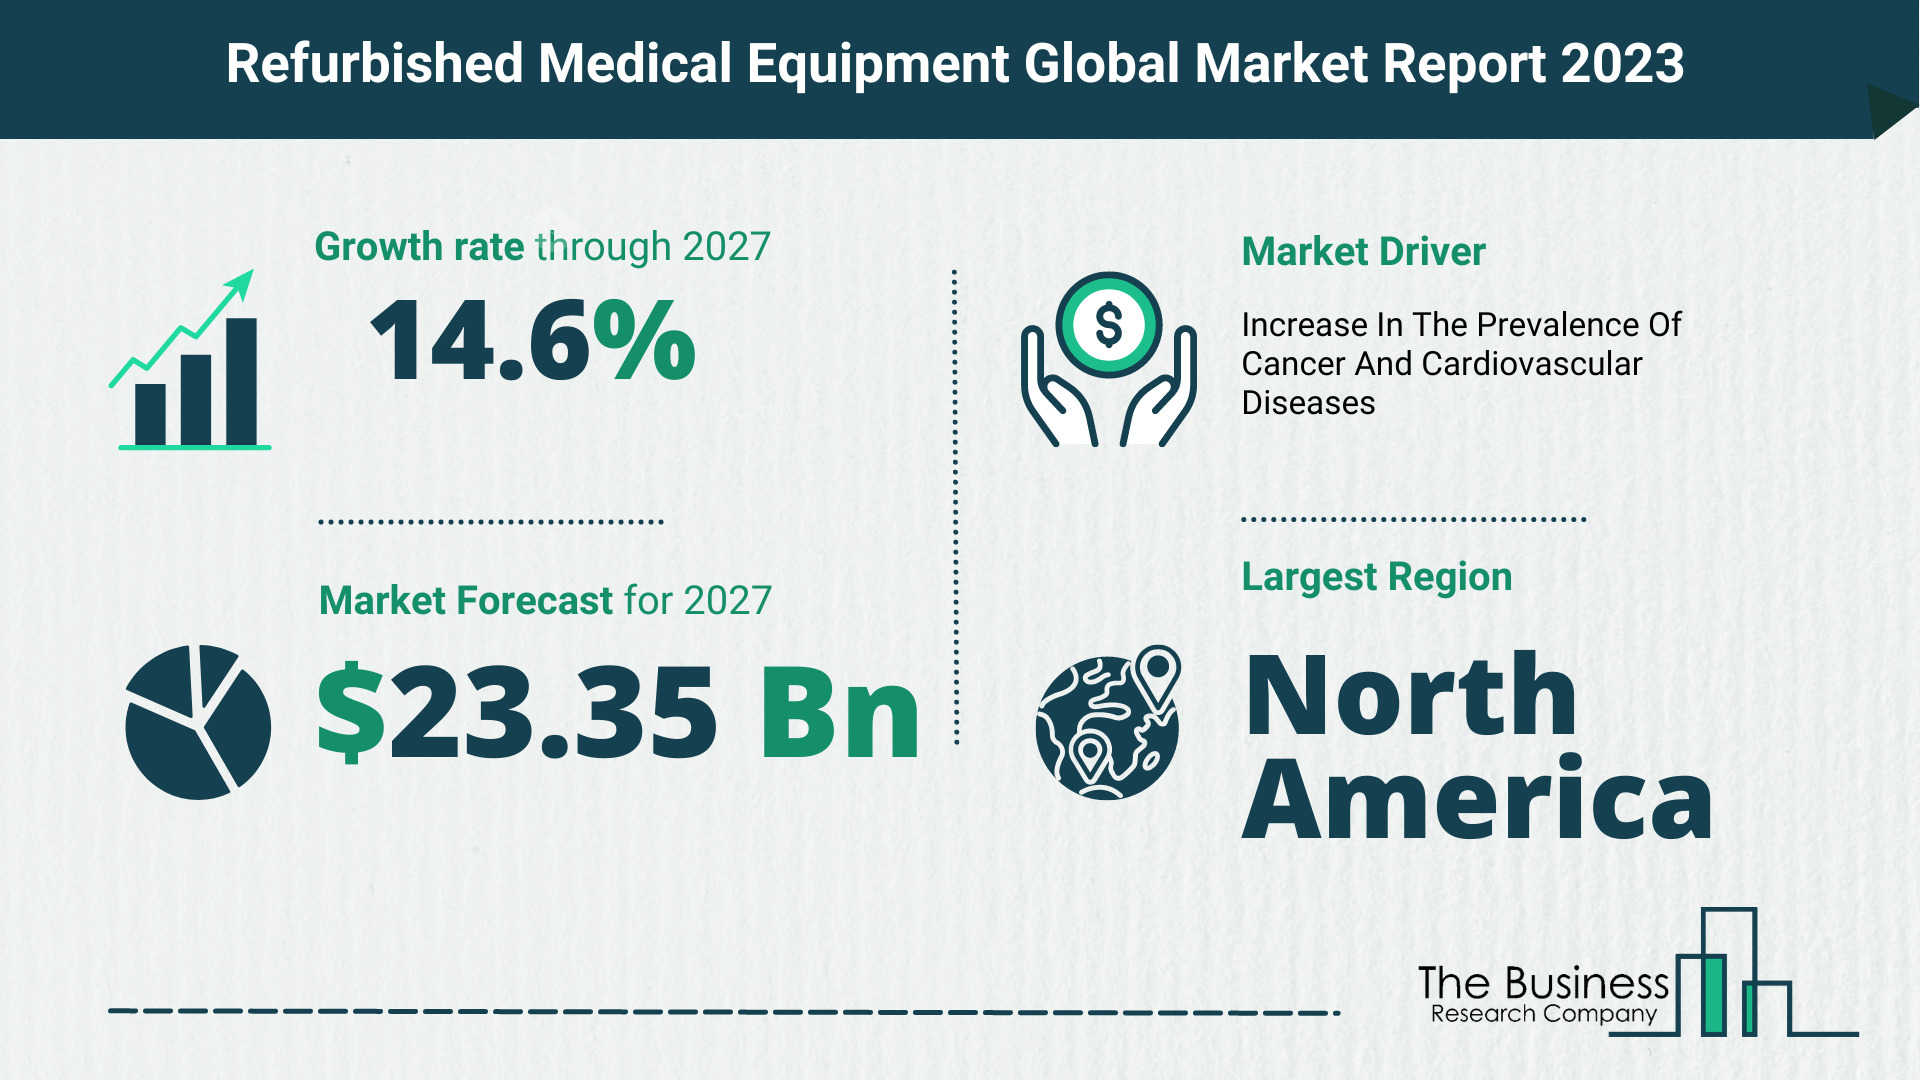 Refurbished Medical Equipment Market Forecast 2023-2027 By The Business Research Company